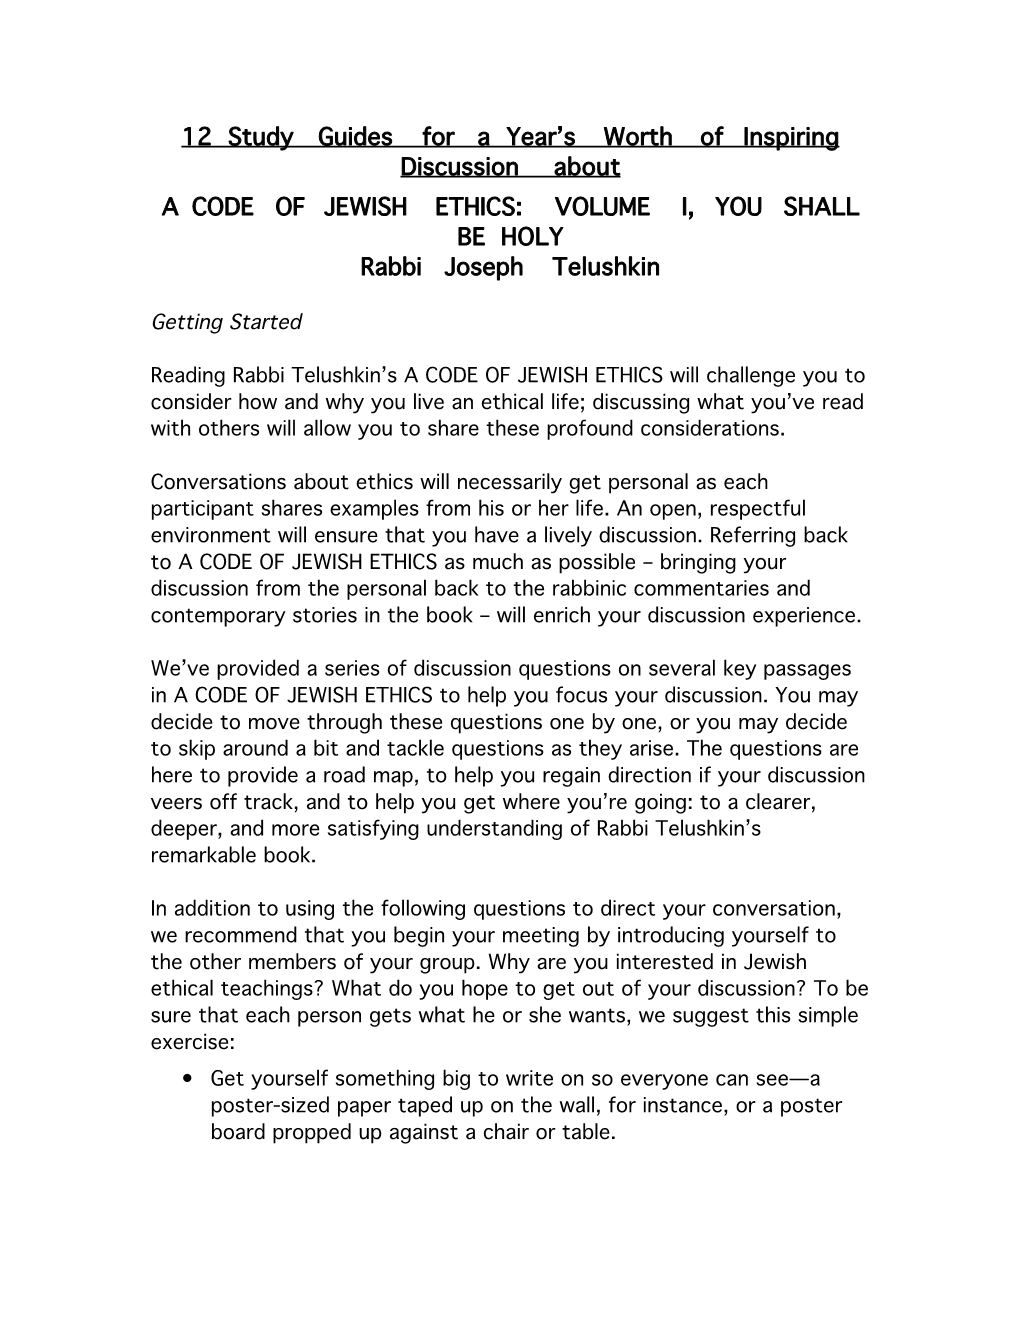 Discussion Guide for Code of Jewish Ethics